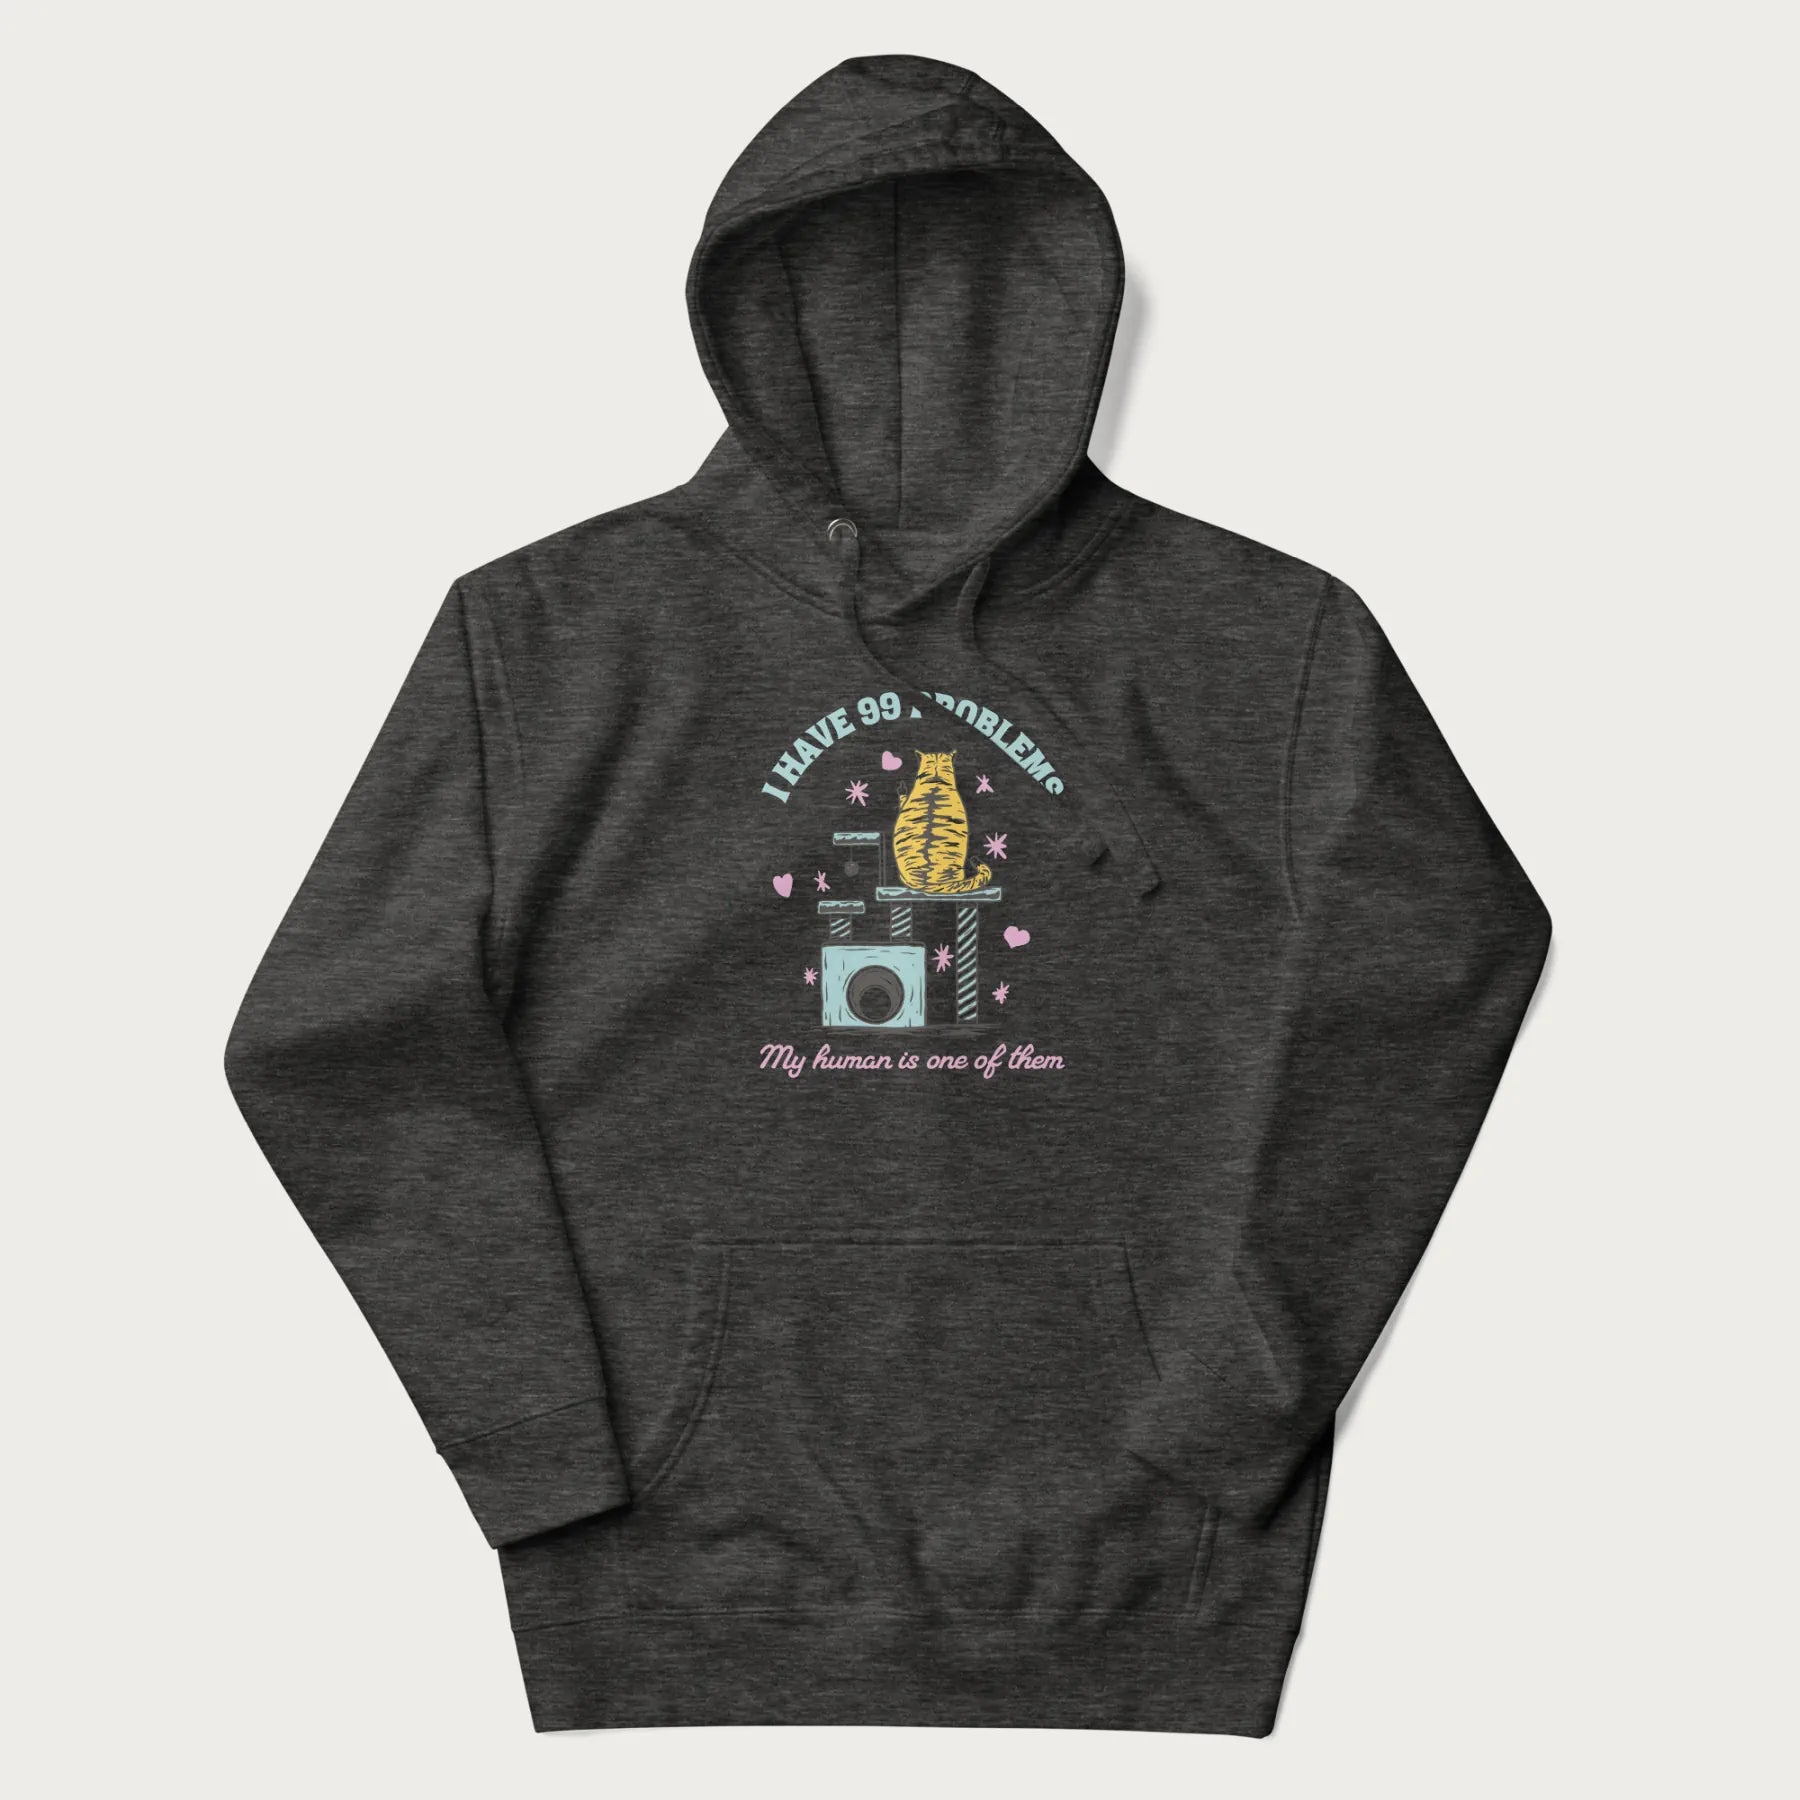 Dark grey hoodie with graphic of a cat on a scratching post and text 'i have 99 problems, my human is one of them'.